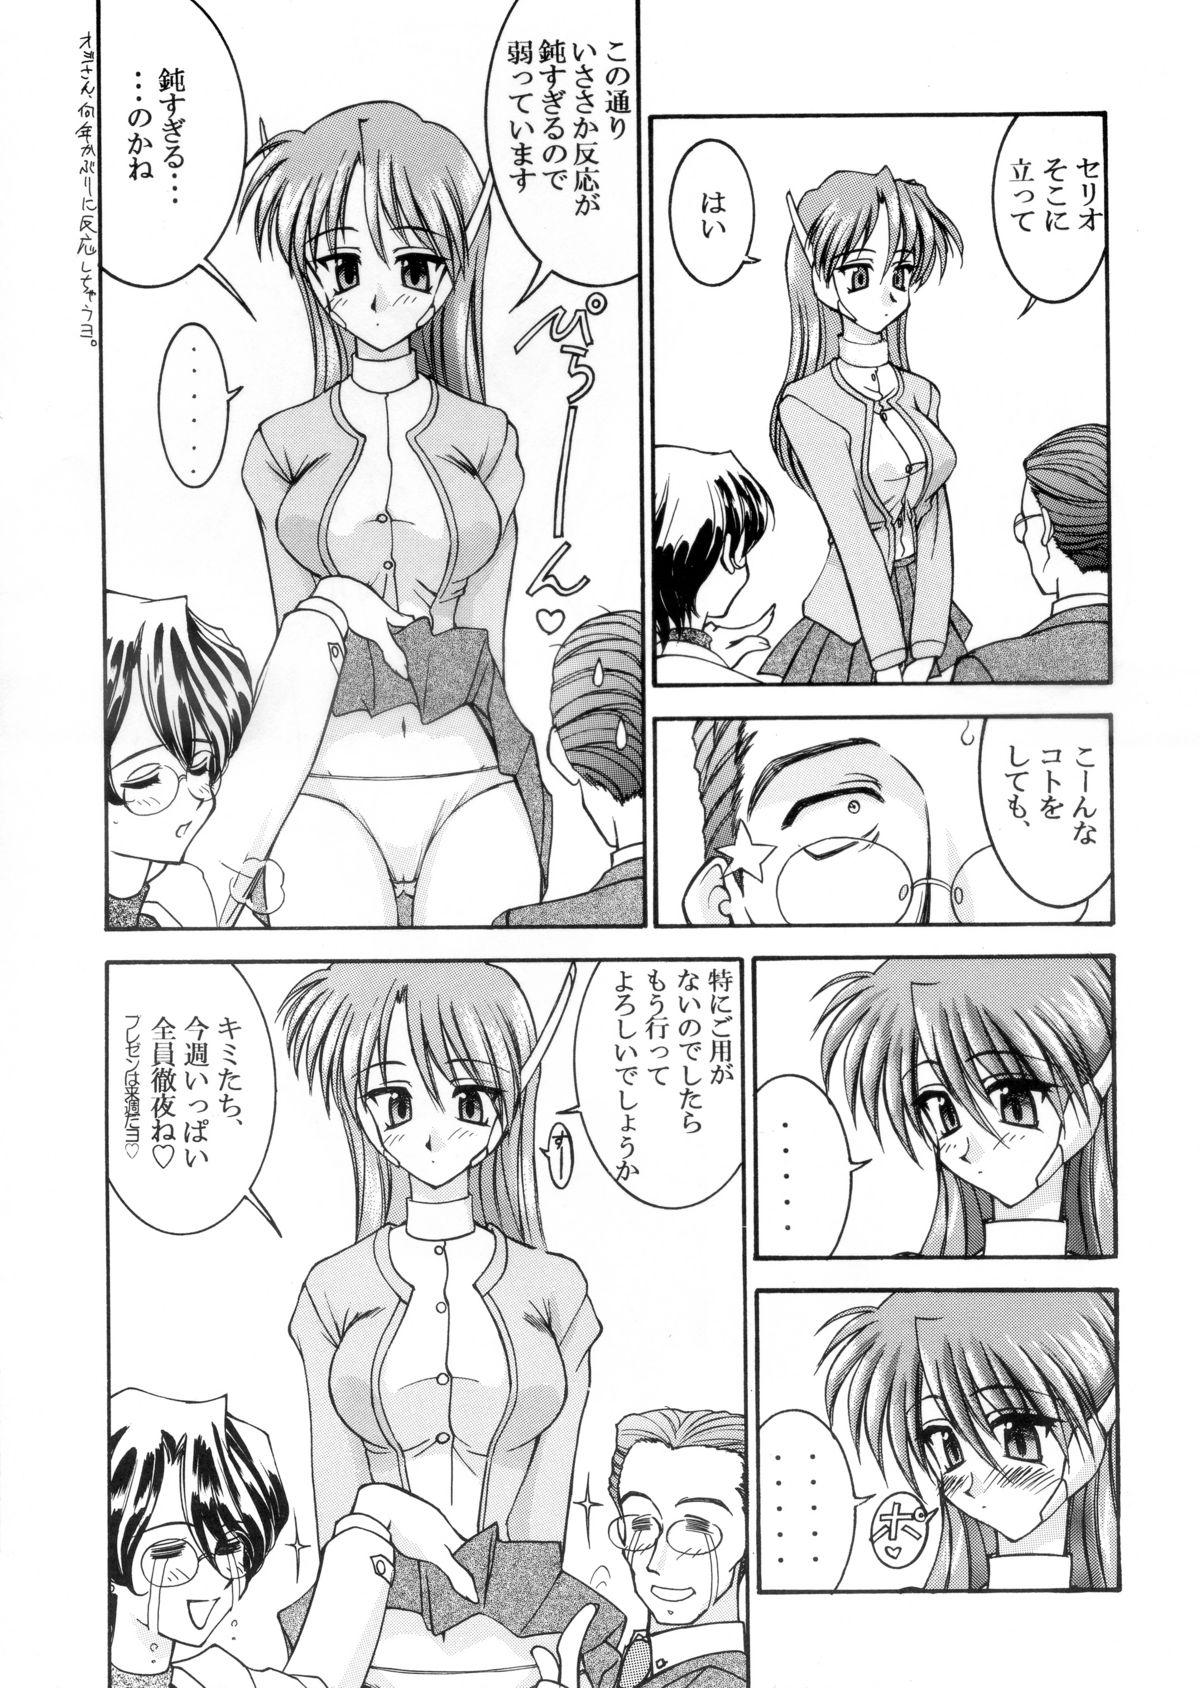 White 『1○才の密かな欲望』『やるじゃん女の子』2種セット - To heart Creampies - Page 5